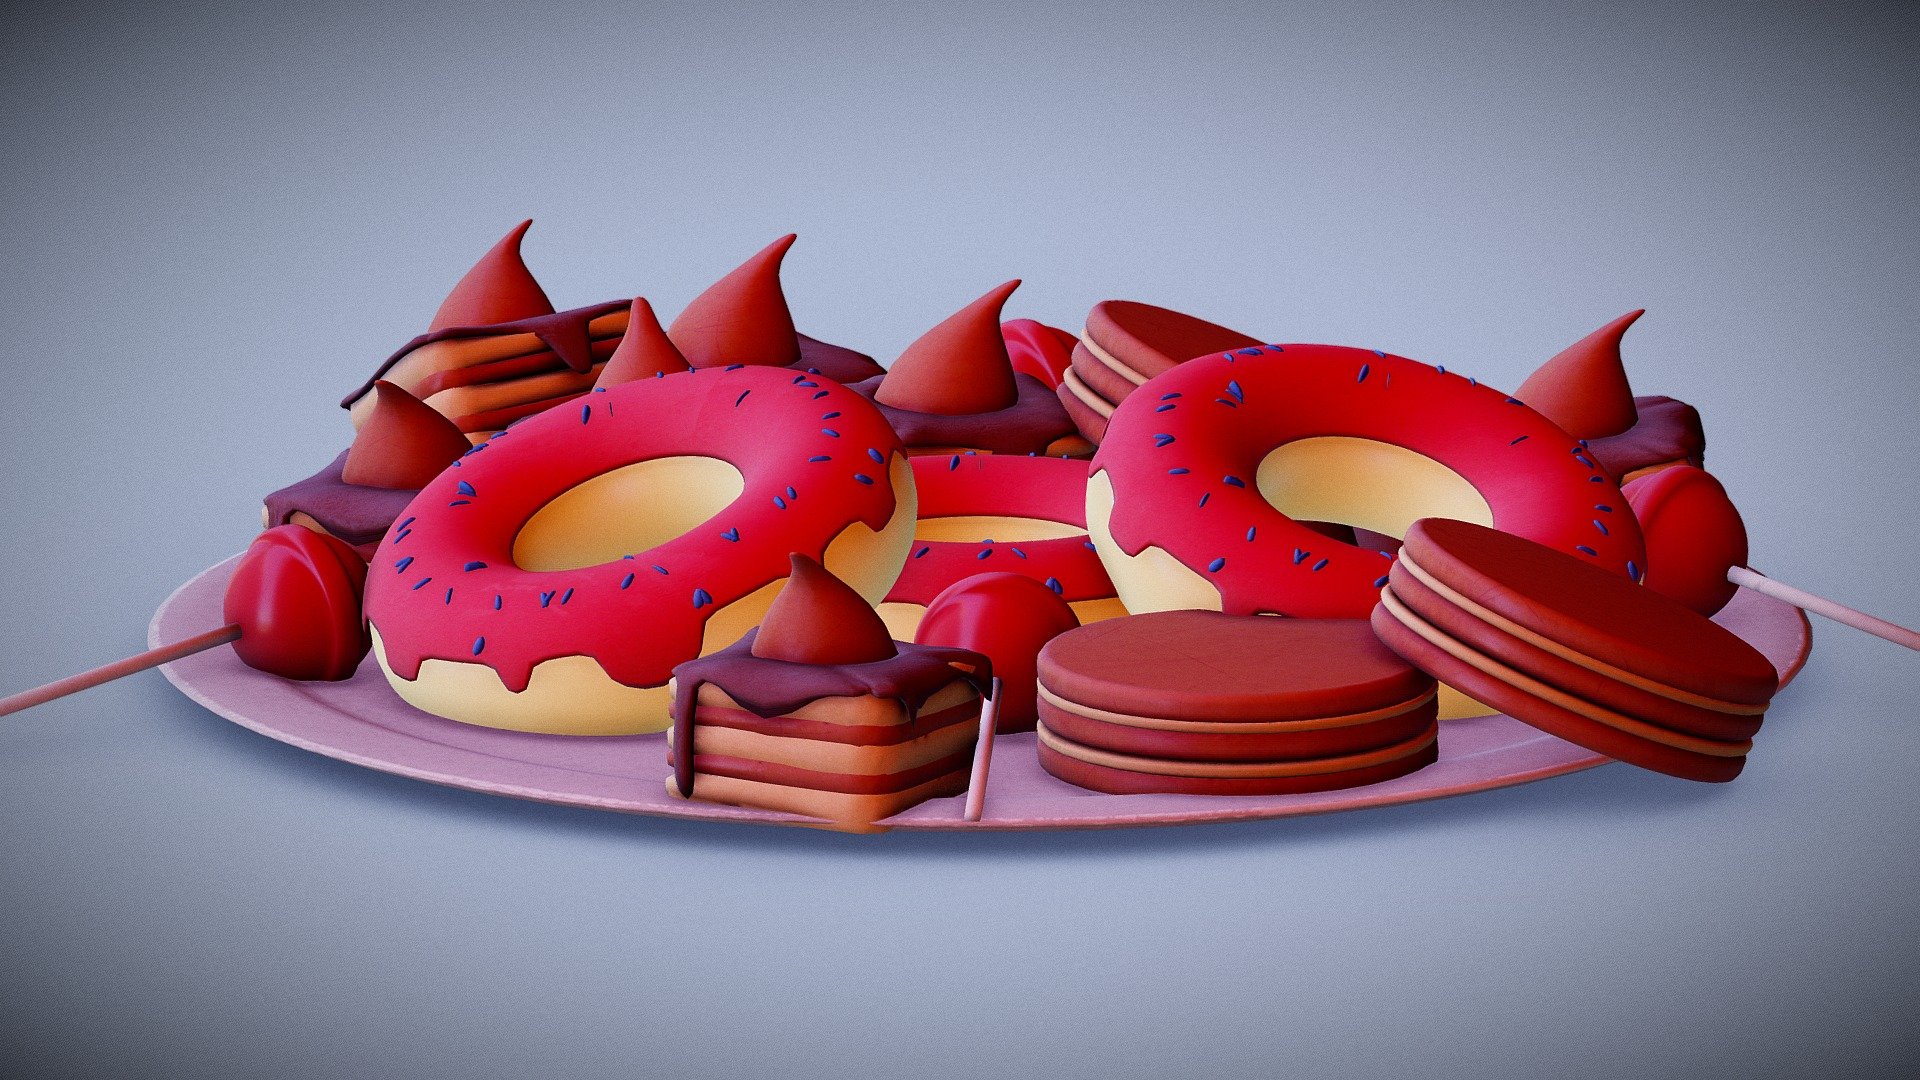 Stylized Donuts and Sweets modeled in Blender and textured in Subsance Painter 3d model